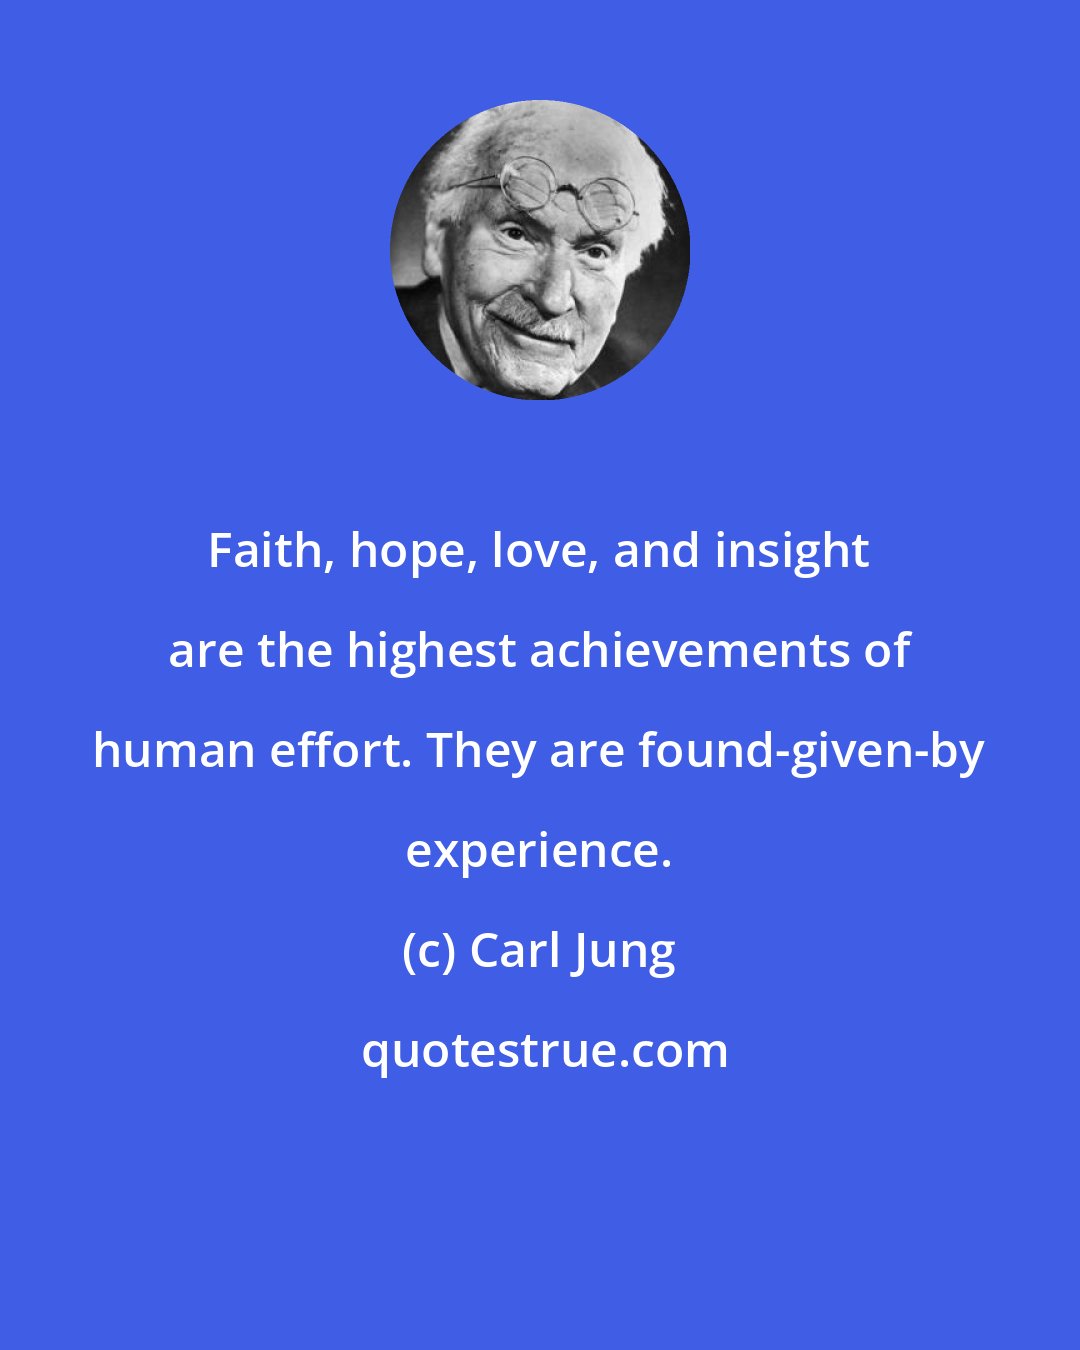 Carl Jung: Faith, hope, love, and insight are the highest achievements of human effort. They are found-given-by experience.